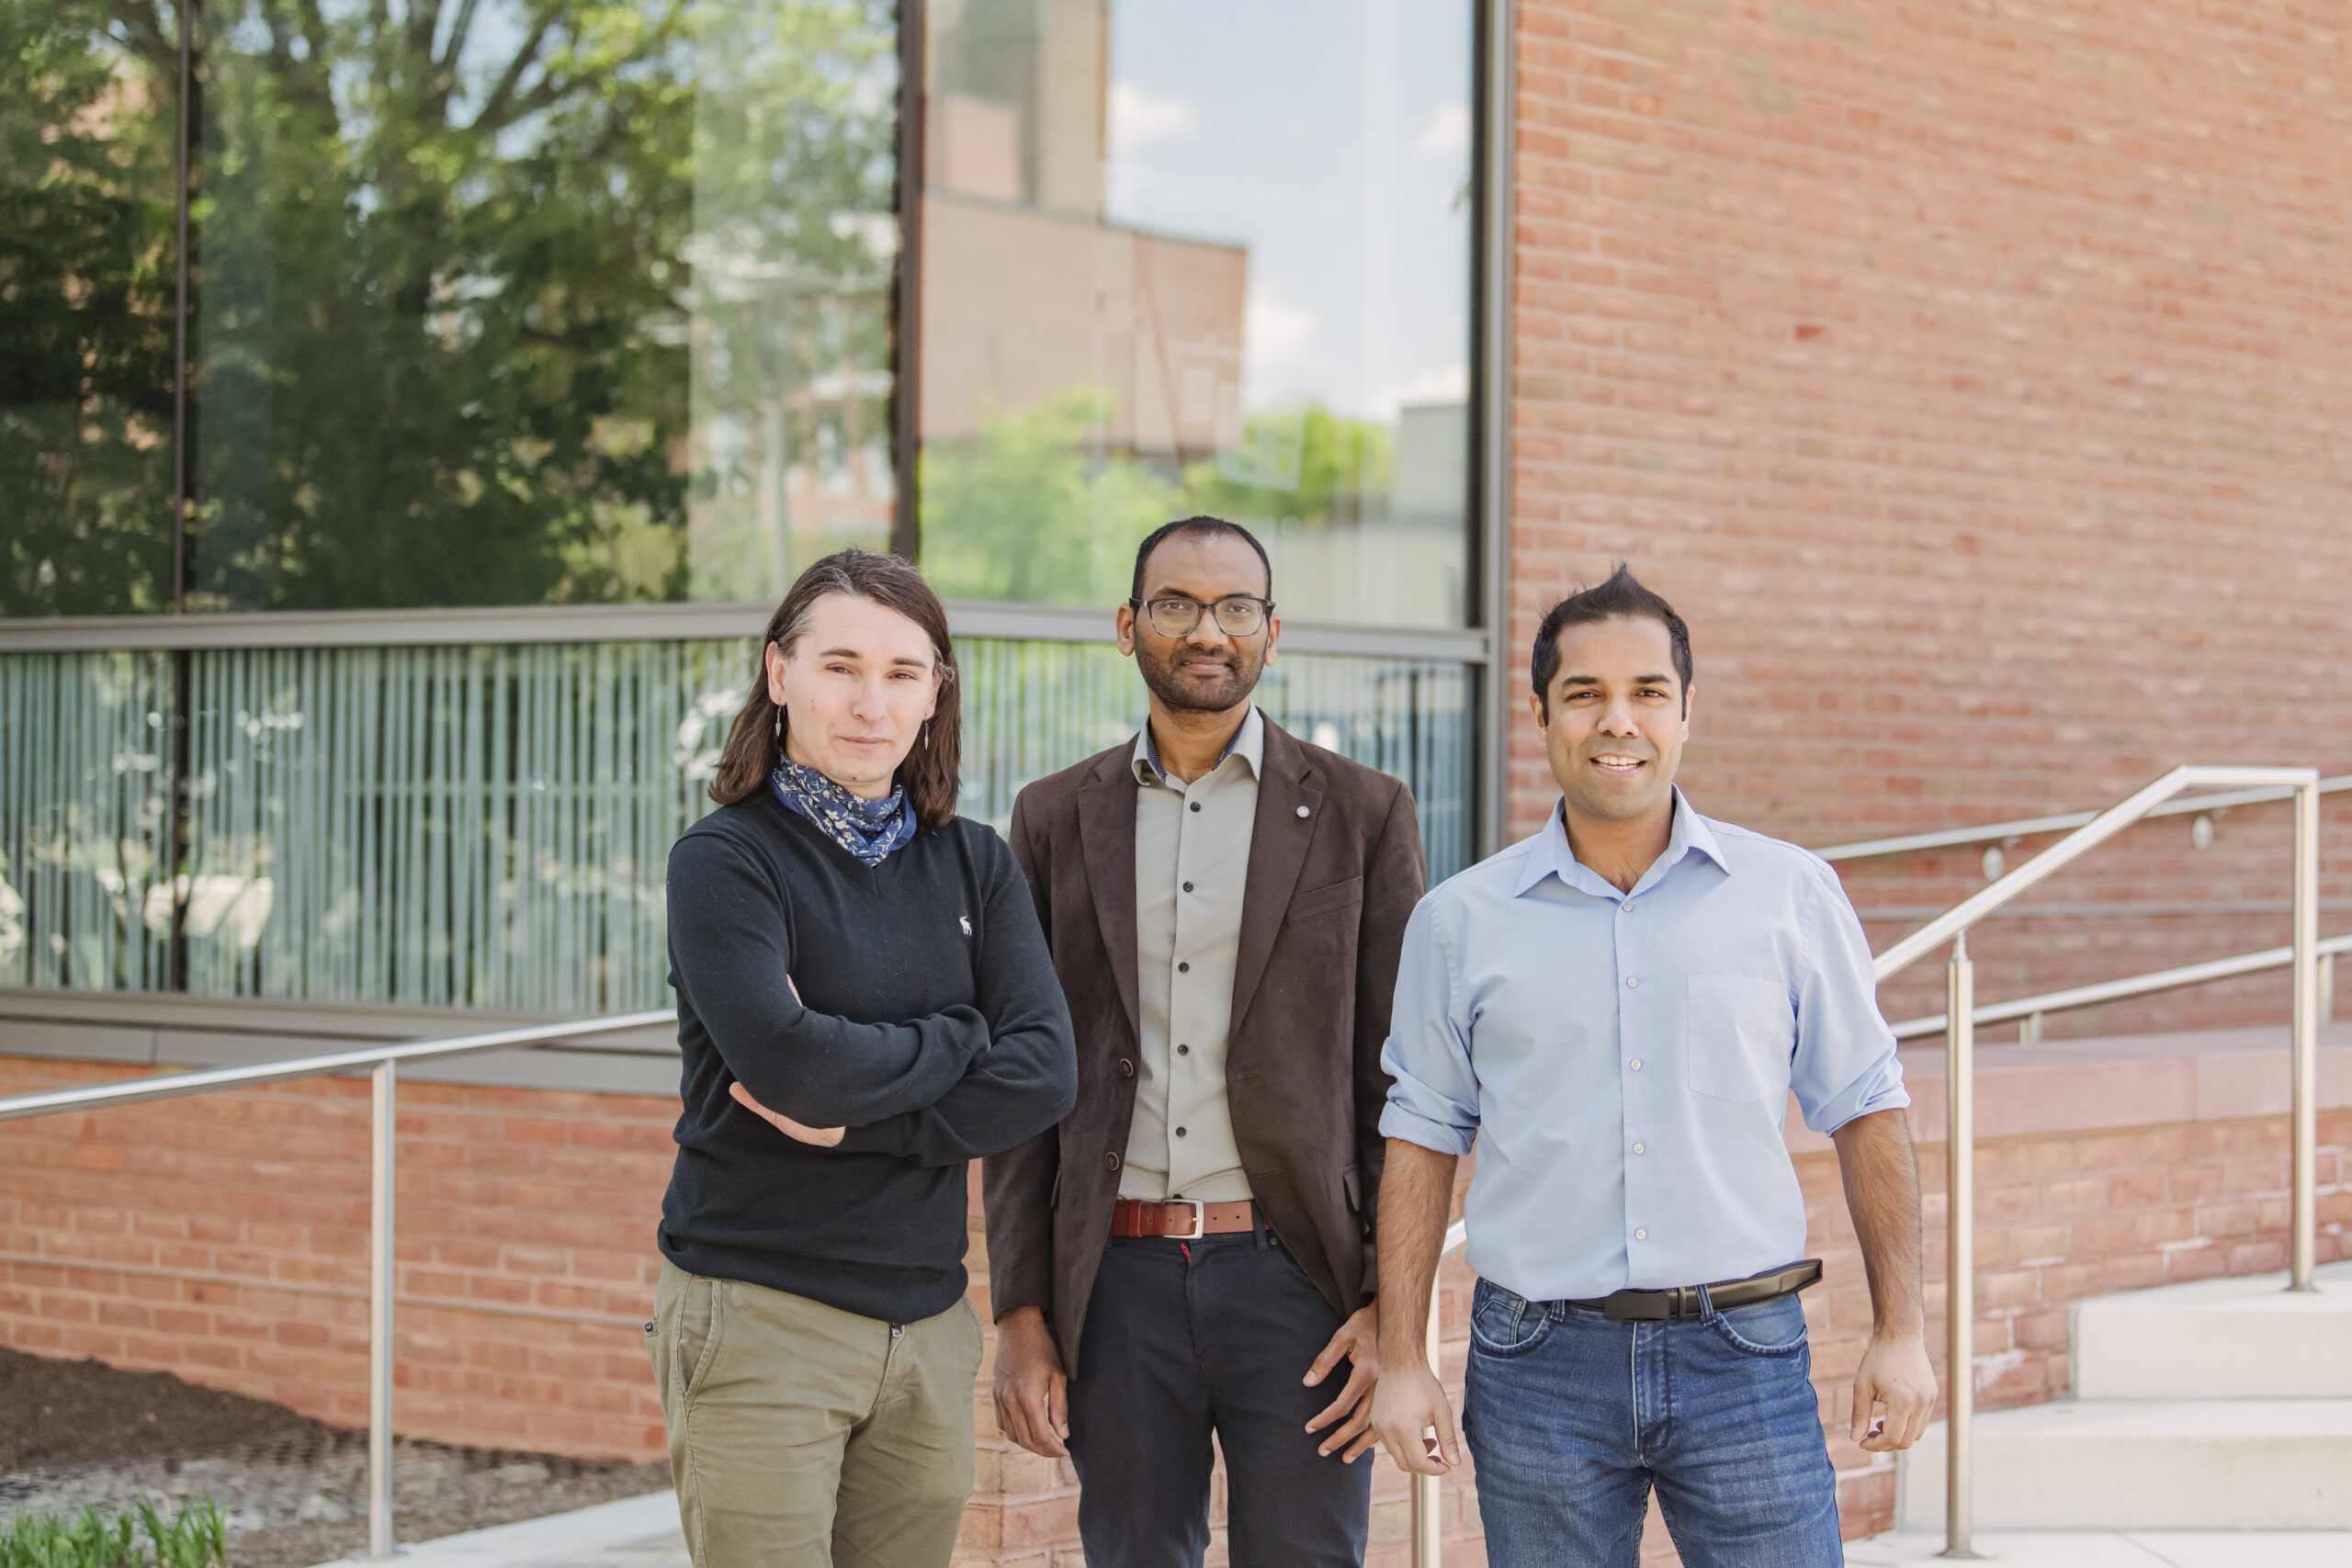 From solar energy harvesting to advanced batteries: Cohort of new engineering faculty bolster UMBC’s commitment to Earth-friendly research